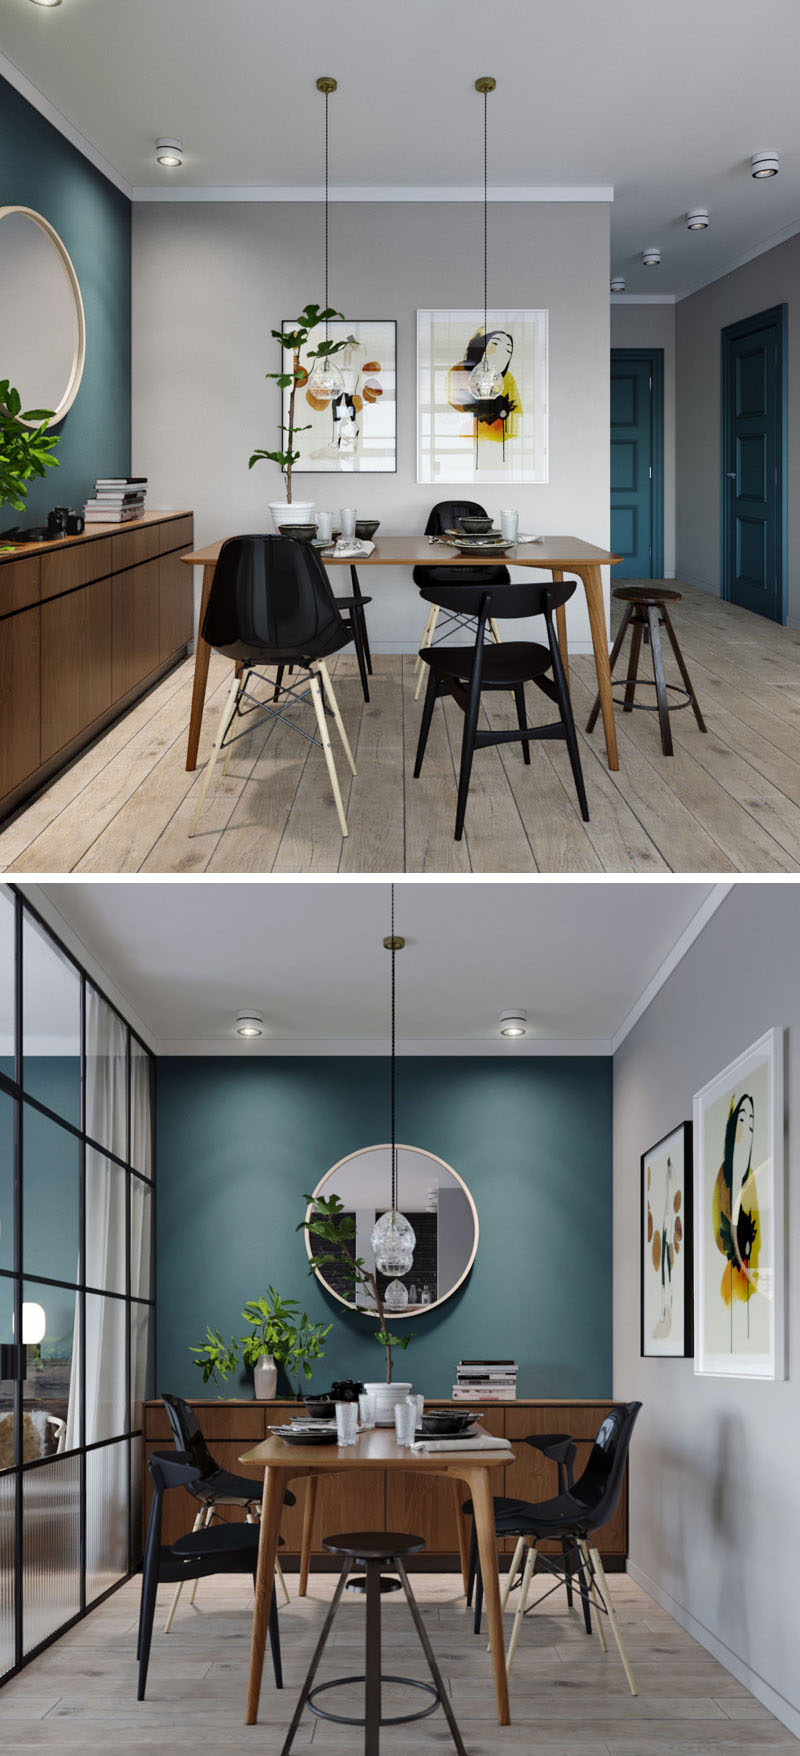 In this small apartment, the dining area has a deep teal blue accent wall that ties in with the front door and storage closet, while the wood furniture adds a natural touch and the black chairs match the black framed glass wall of the bedroom. #TealWall #DiningRoom #DiningRoomIdeas #Interiors